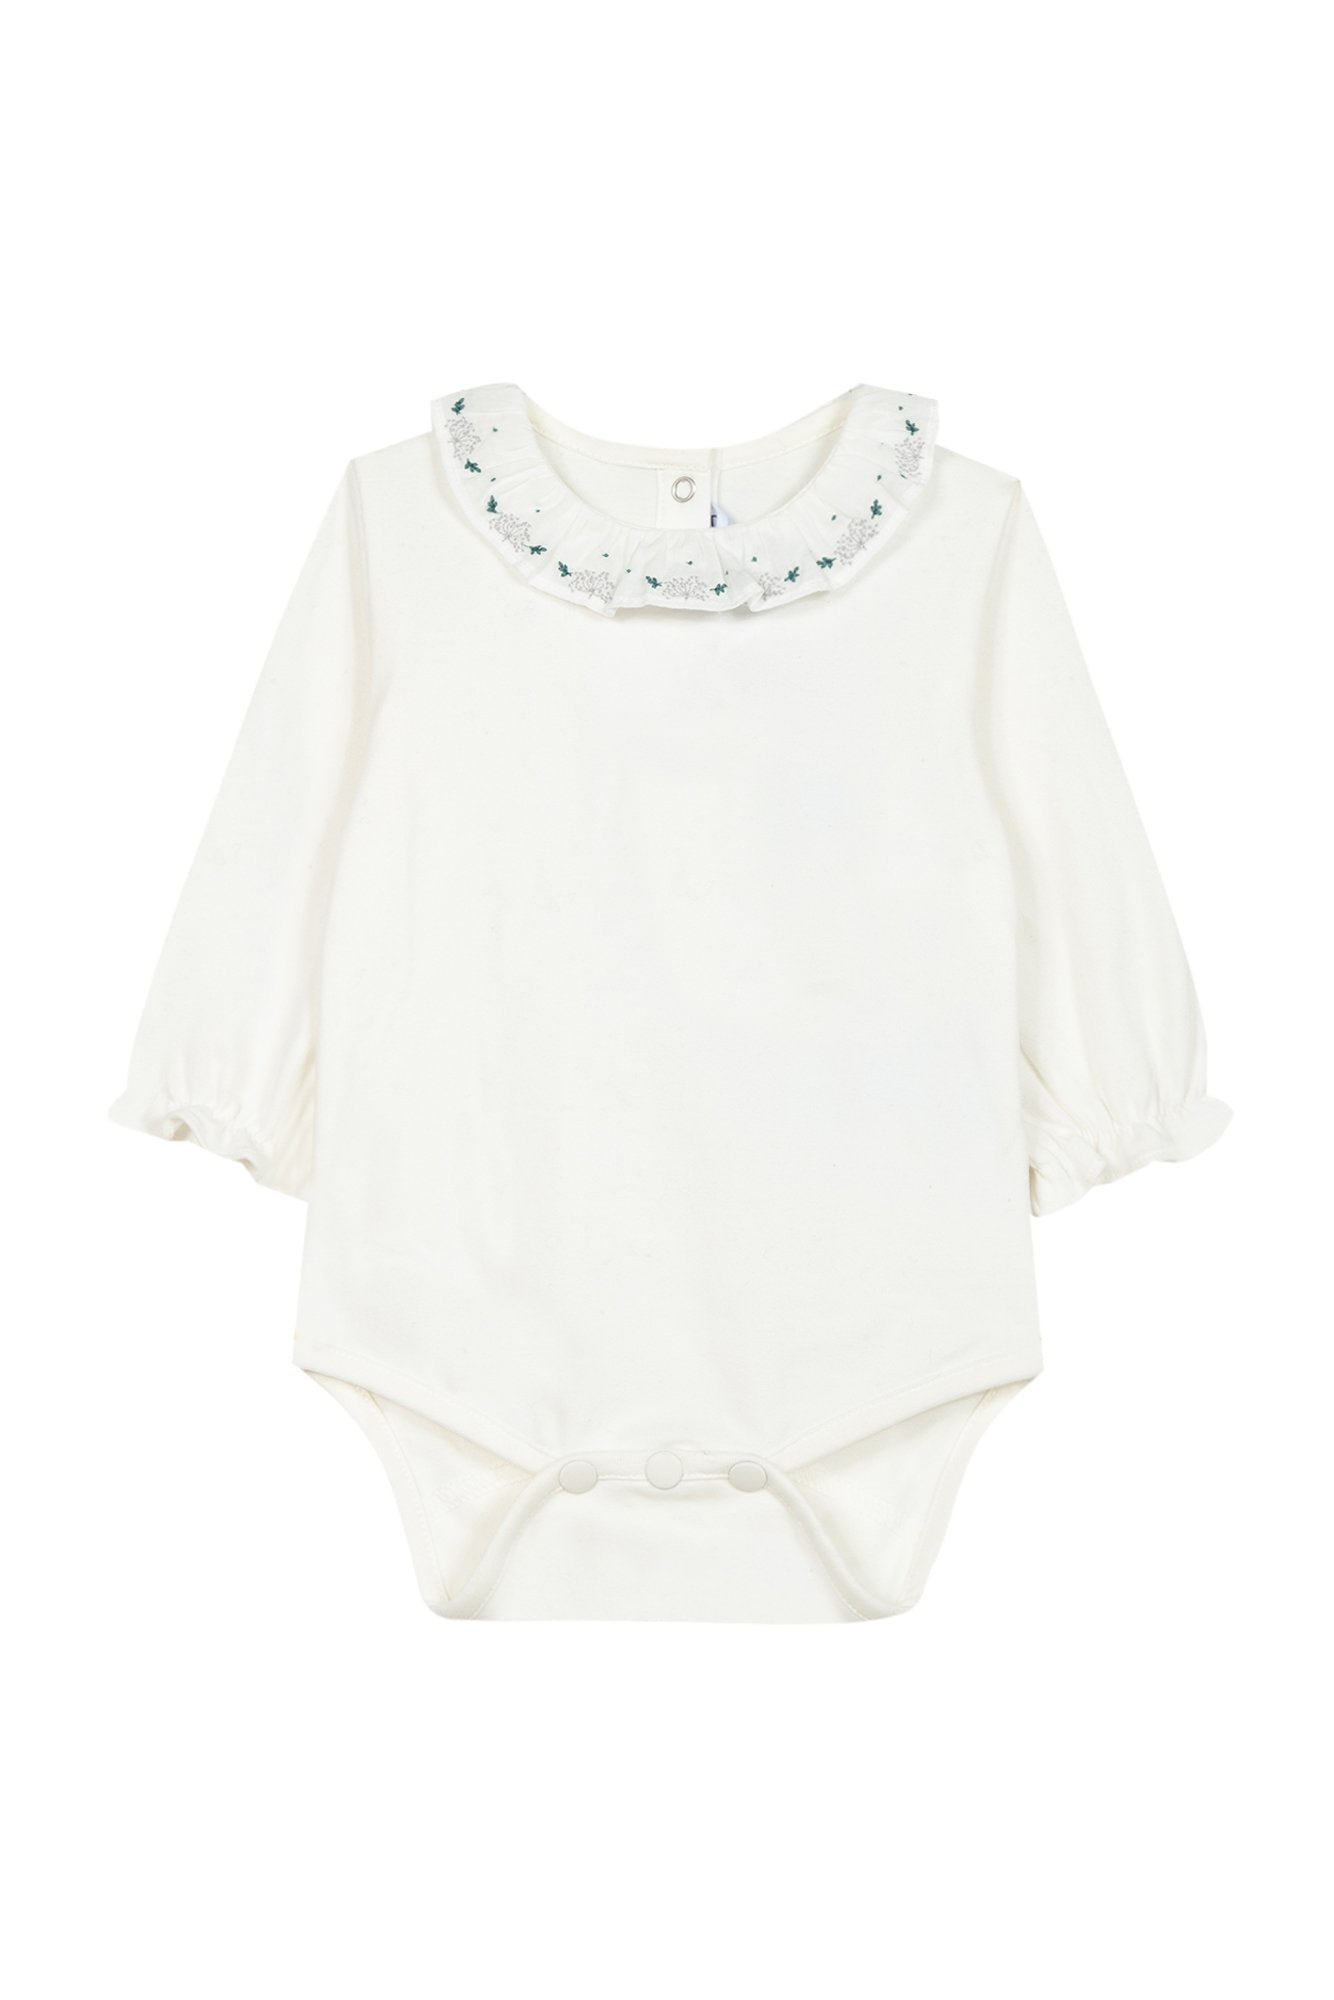 Bodysuit - Pale green with ruffled collar and floral embroidery - Tartine Et Chocolat